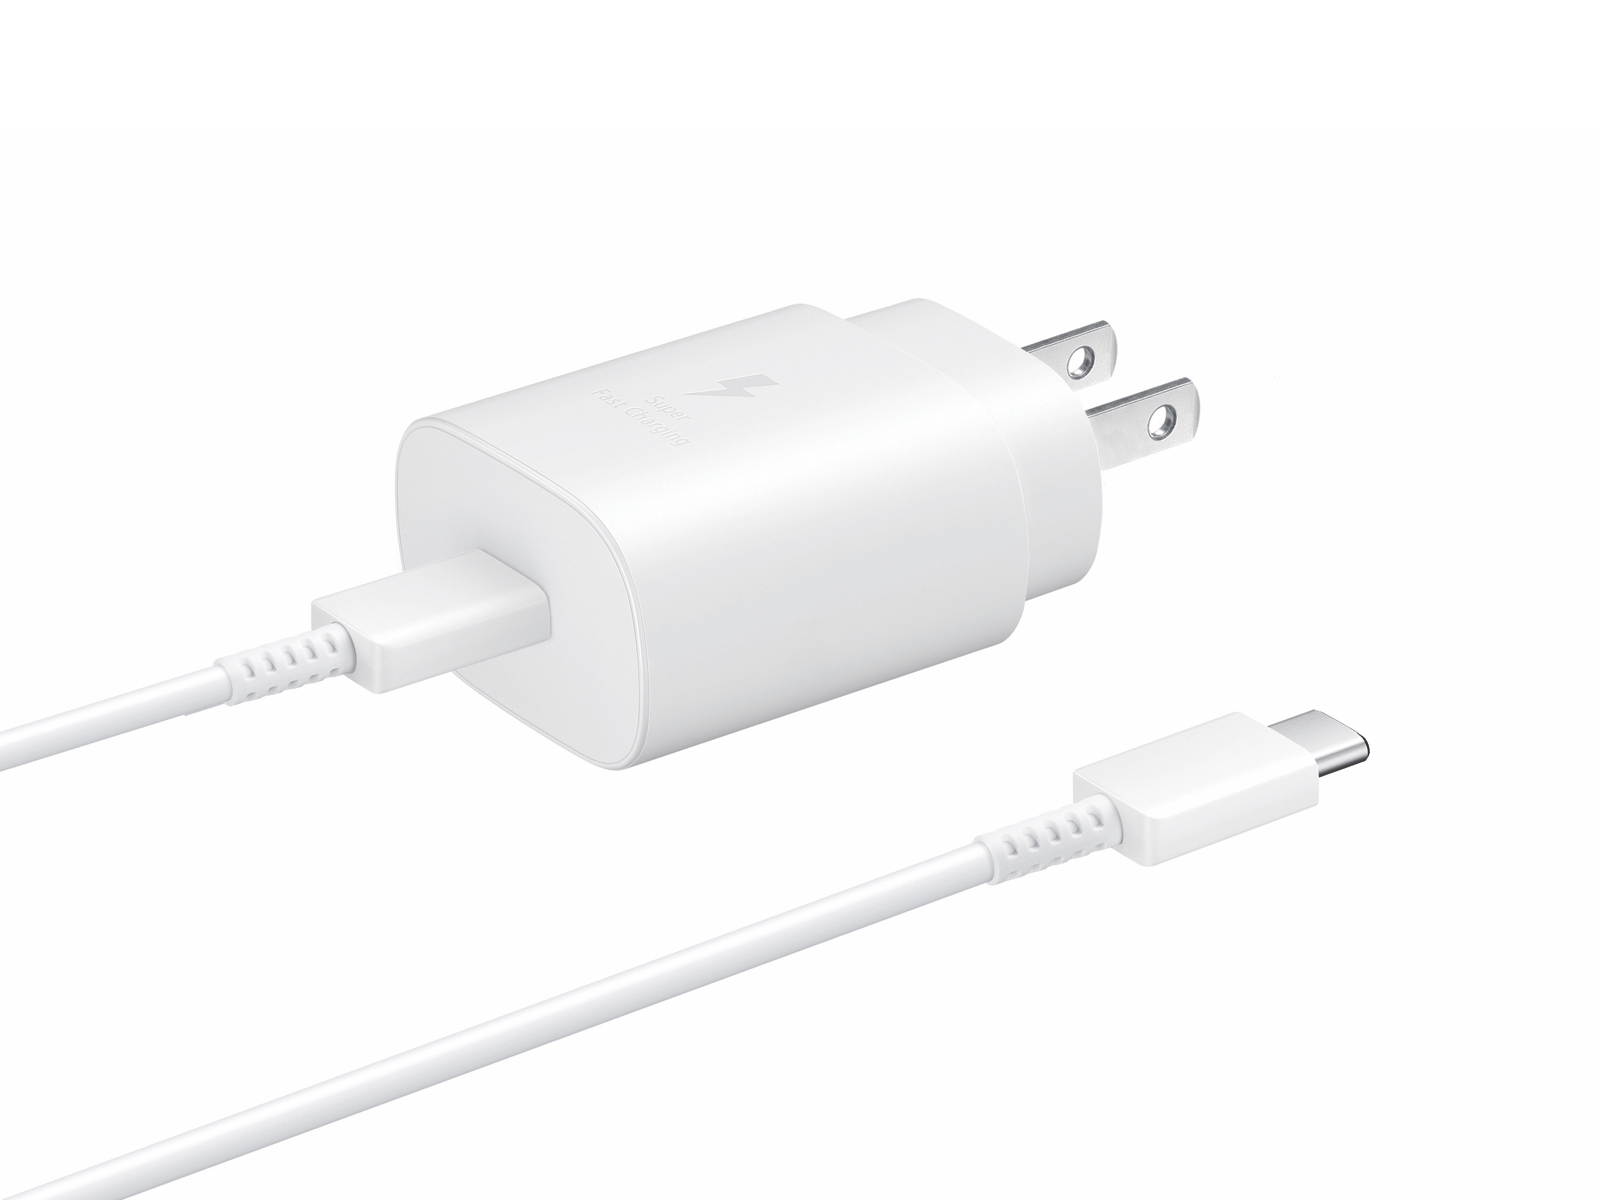 Samsung Fast Charger 25W With USB-C Cable White